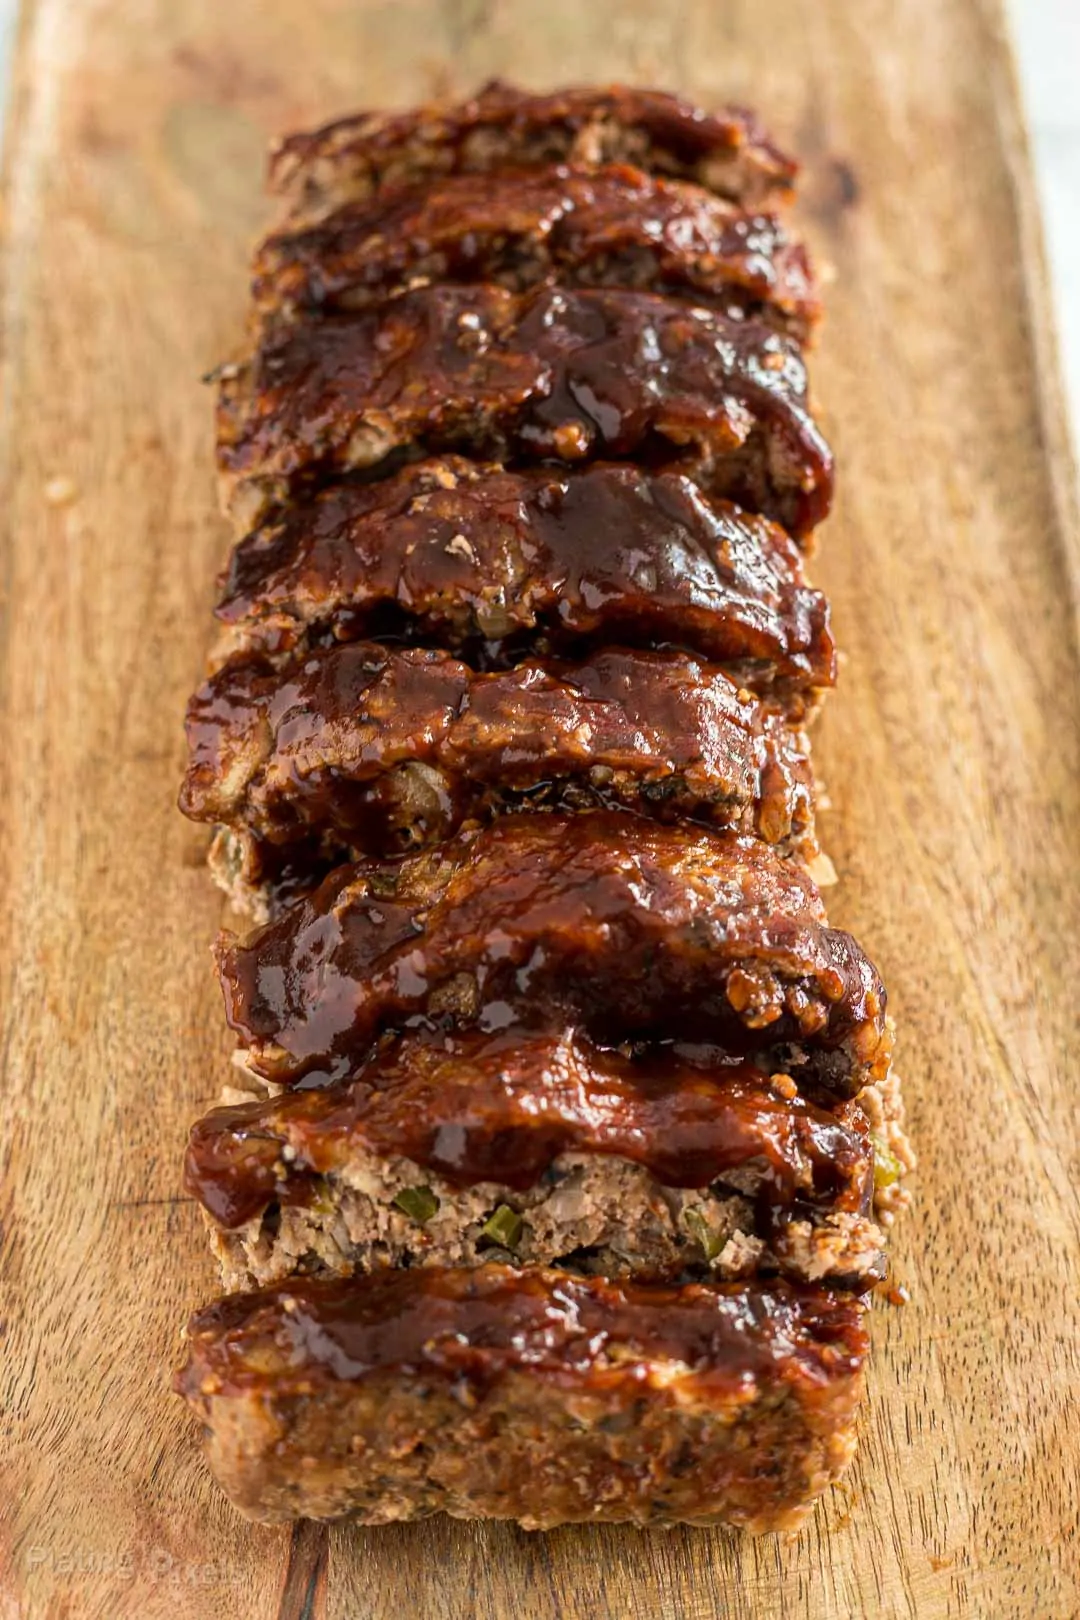 Slices of mushroom meatloaf covered in BBQ sauce on a cutting board